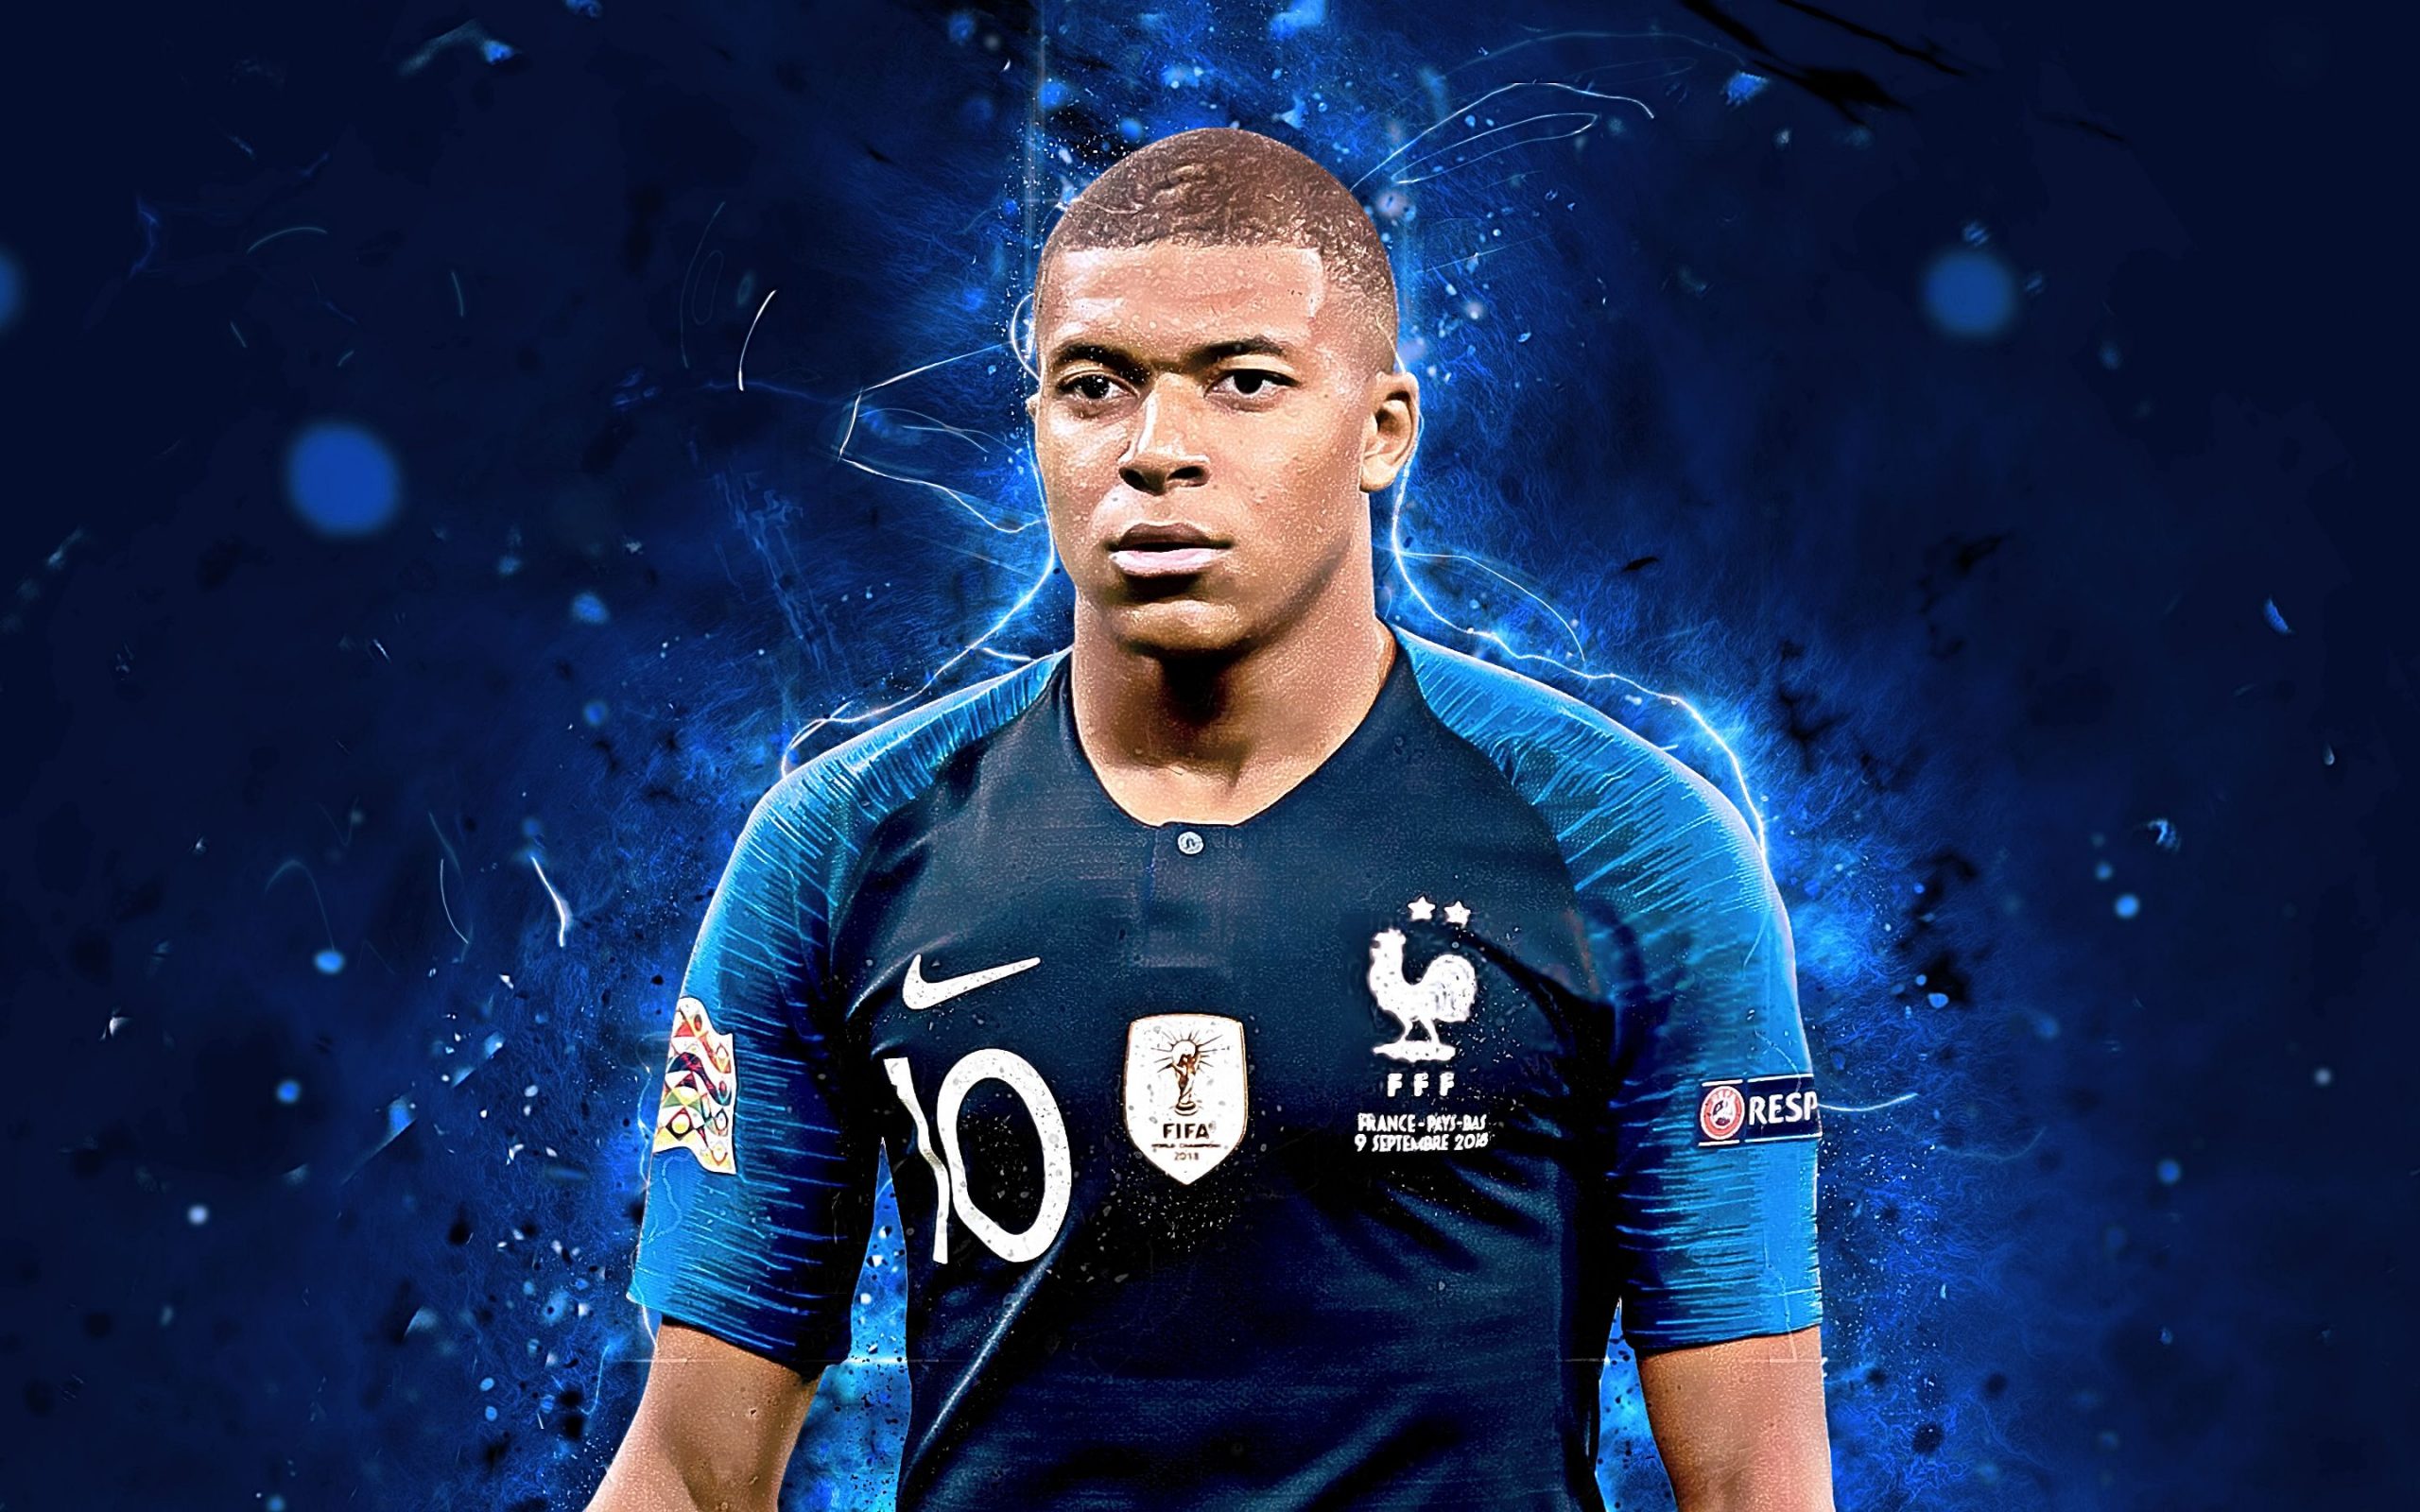 Kylian Mbappé Wallpapers and Backgrounds